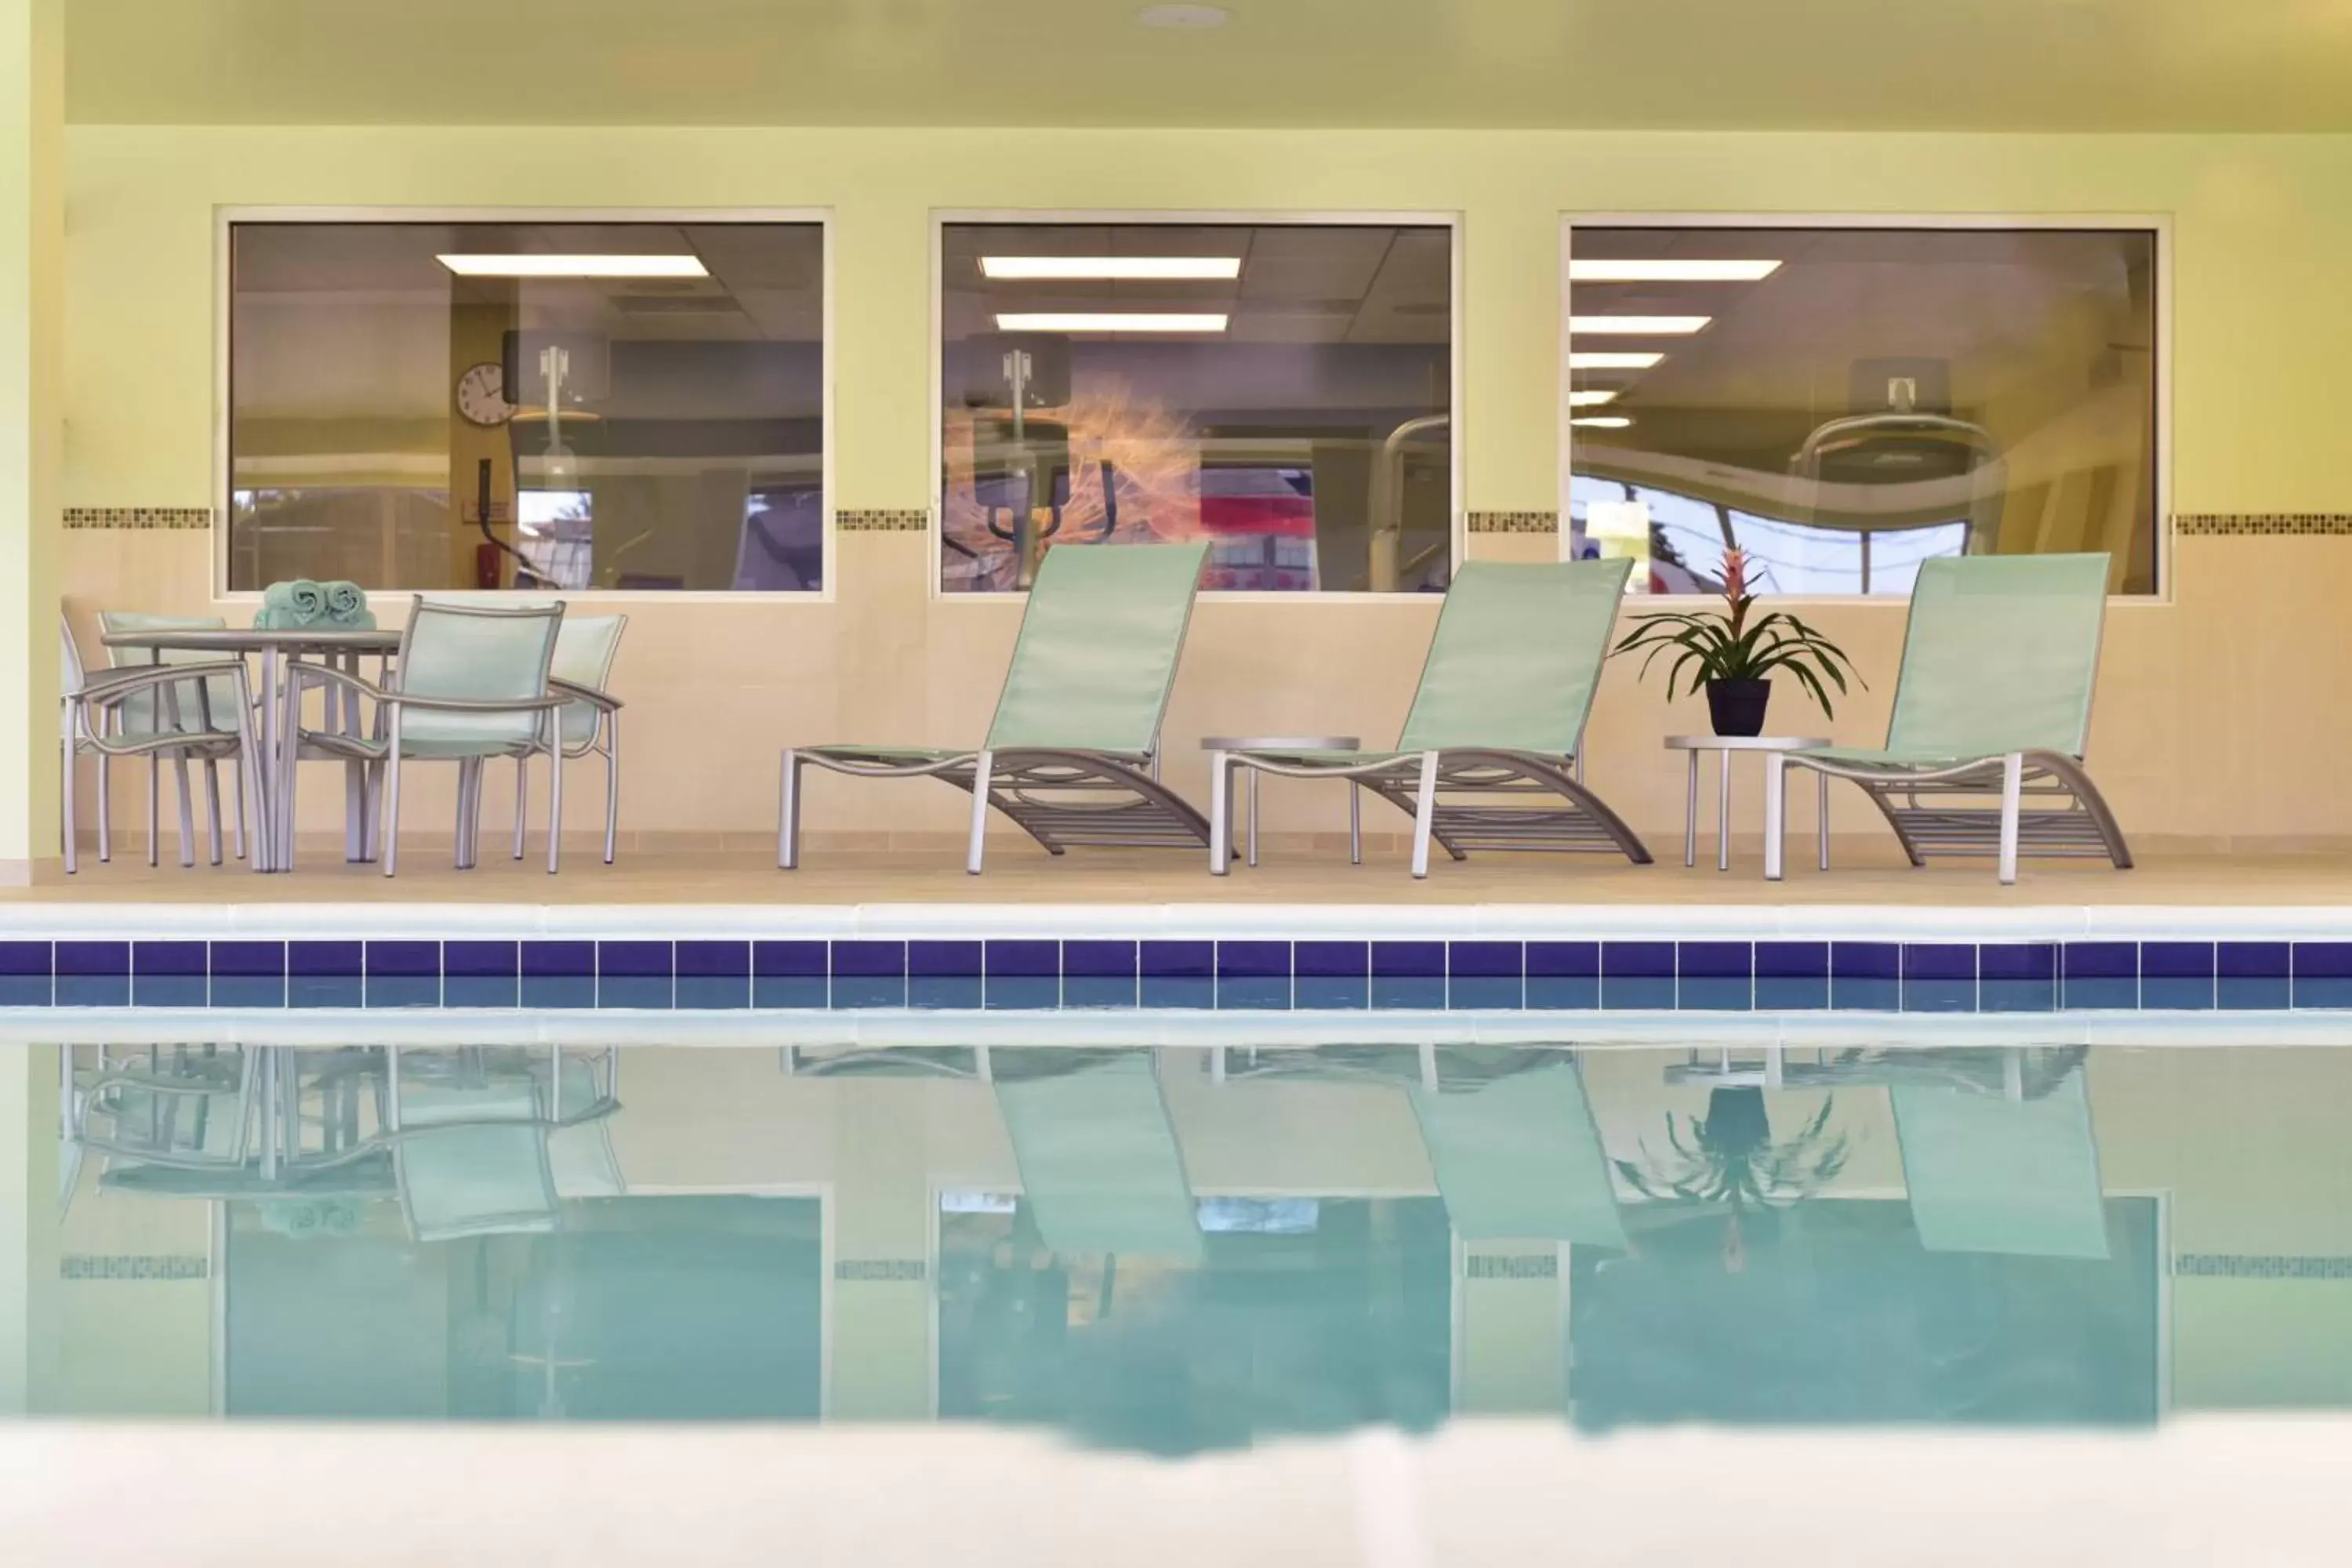 Swimming Pool in SpringHill Suites by Marriott Wisconsin Dells